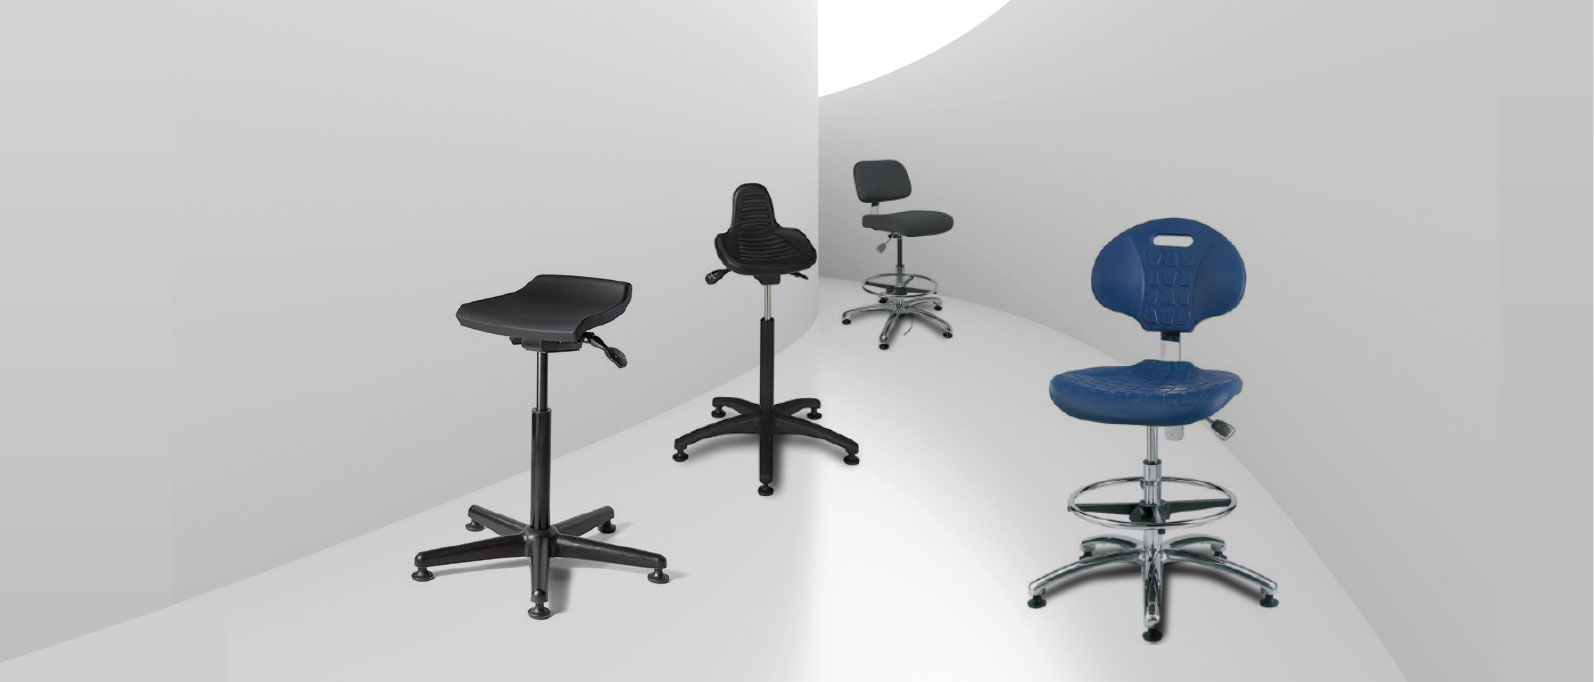 industrial seating - esd chairs and stools